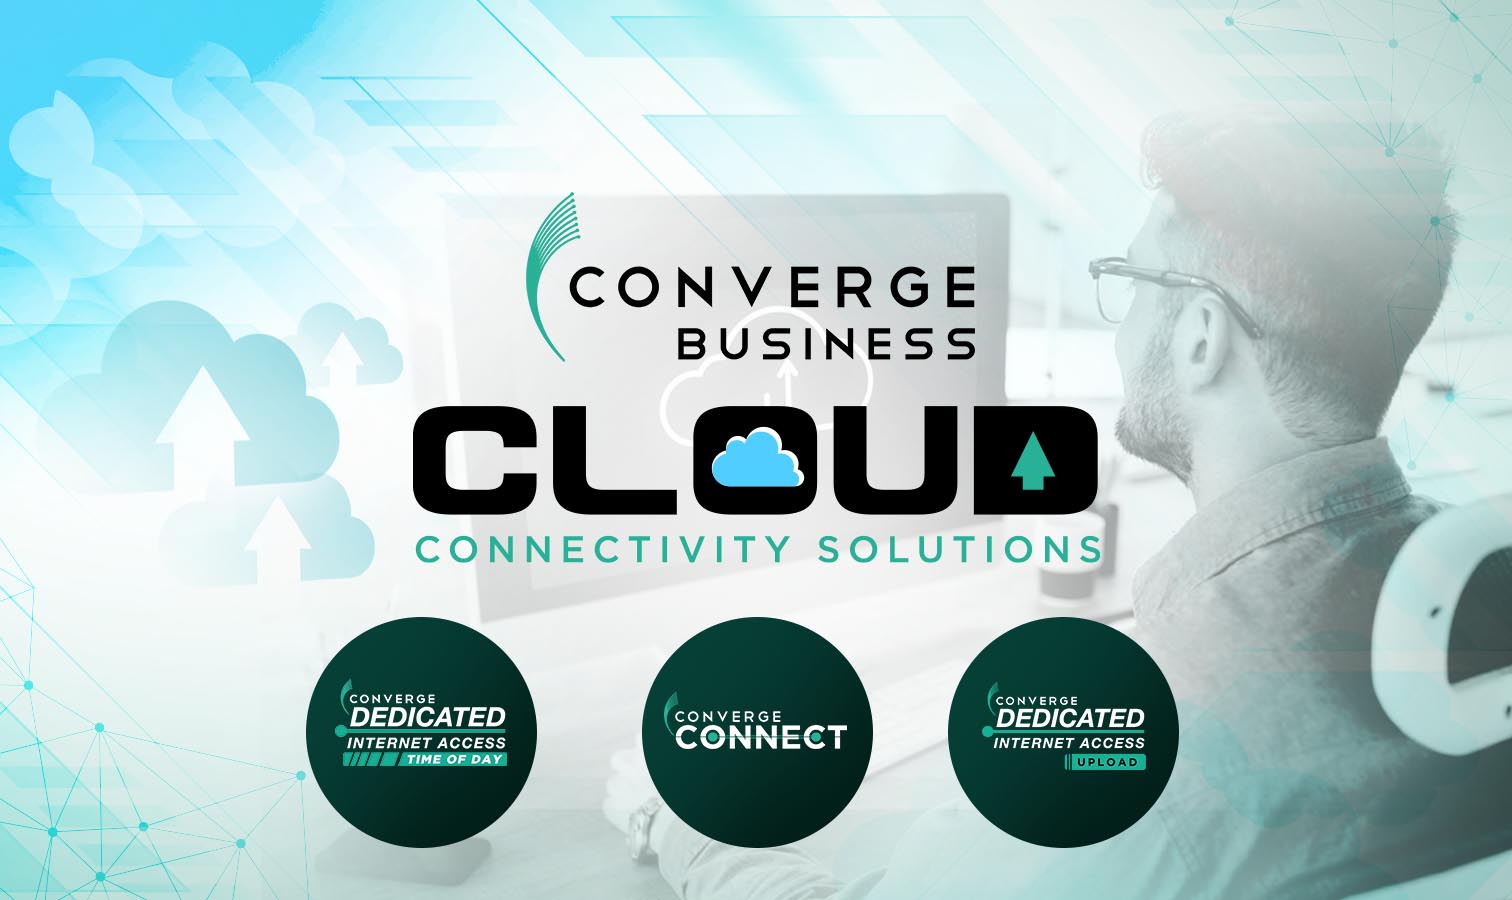 Experience better and safer connectivity for Enterprises with Converge Business Cloud Connectivity Solutions